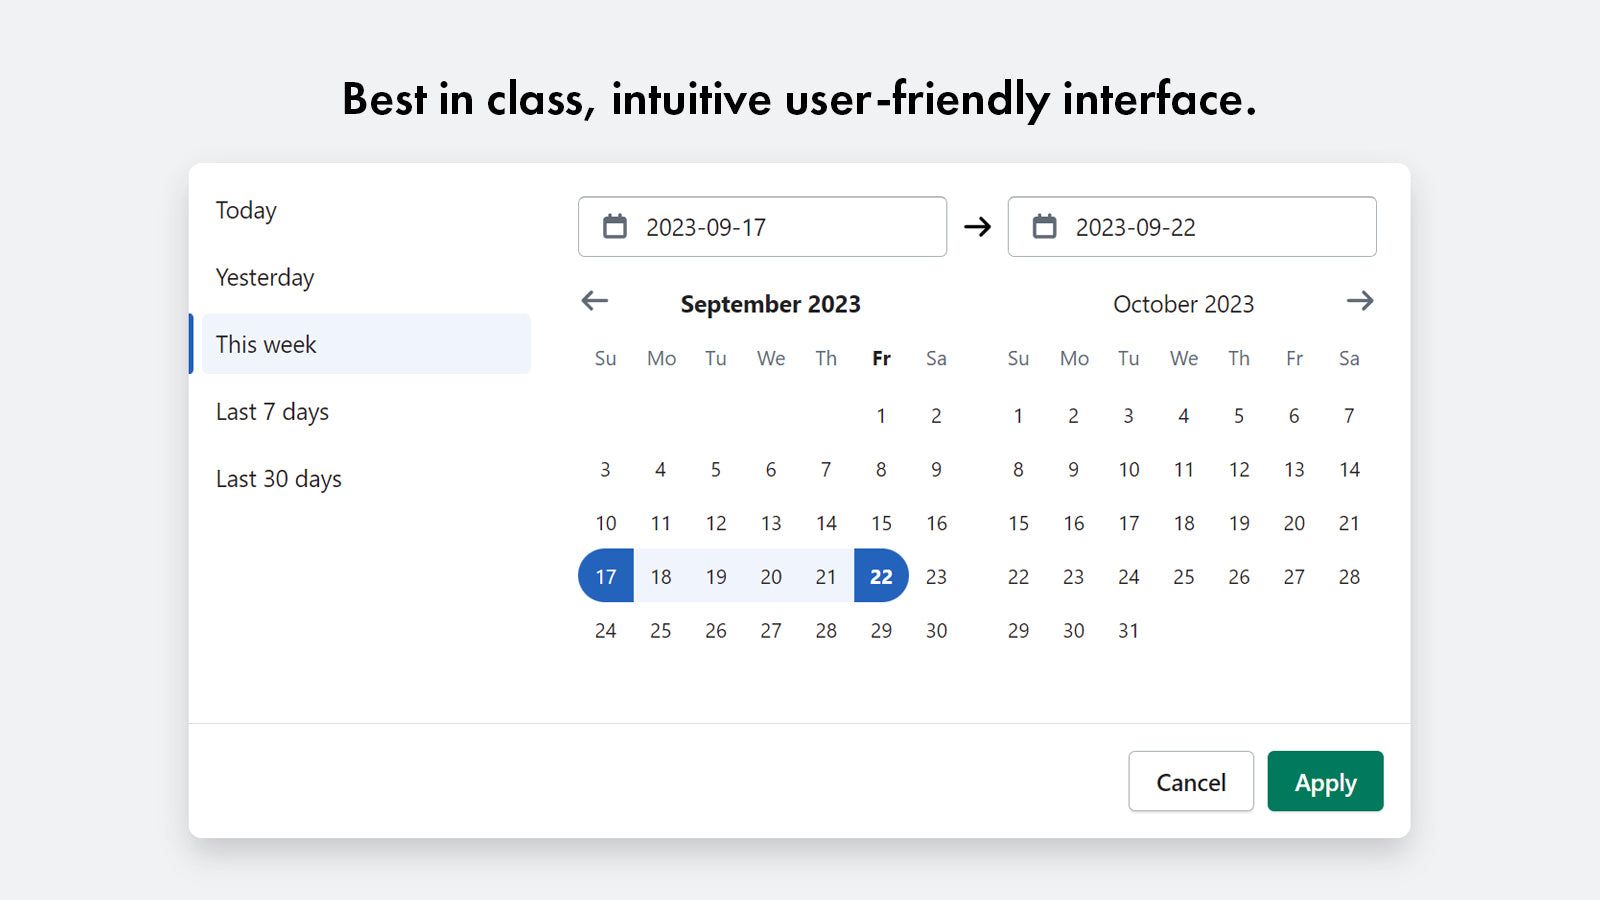 Best in class, intuitive user-friendly interface